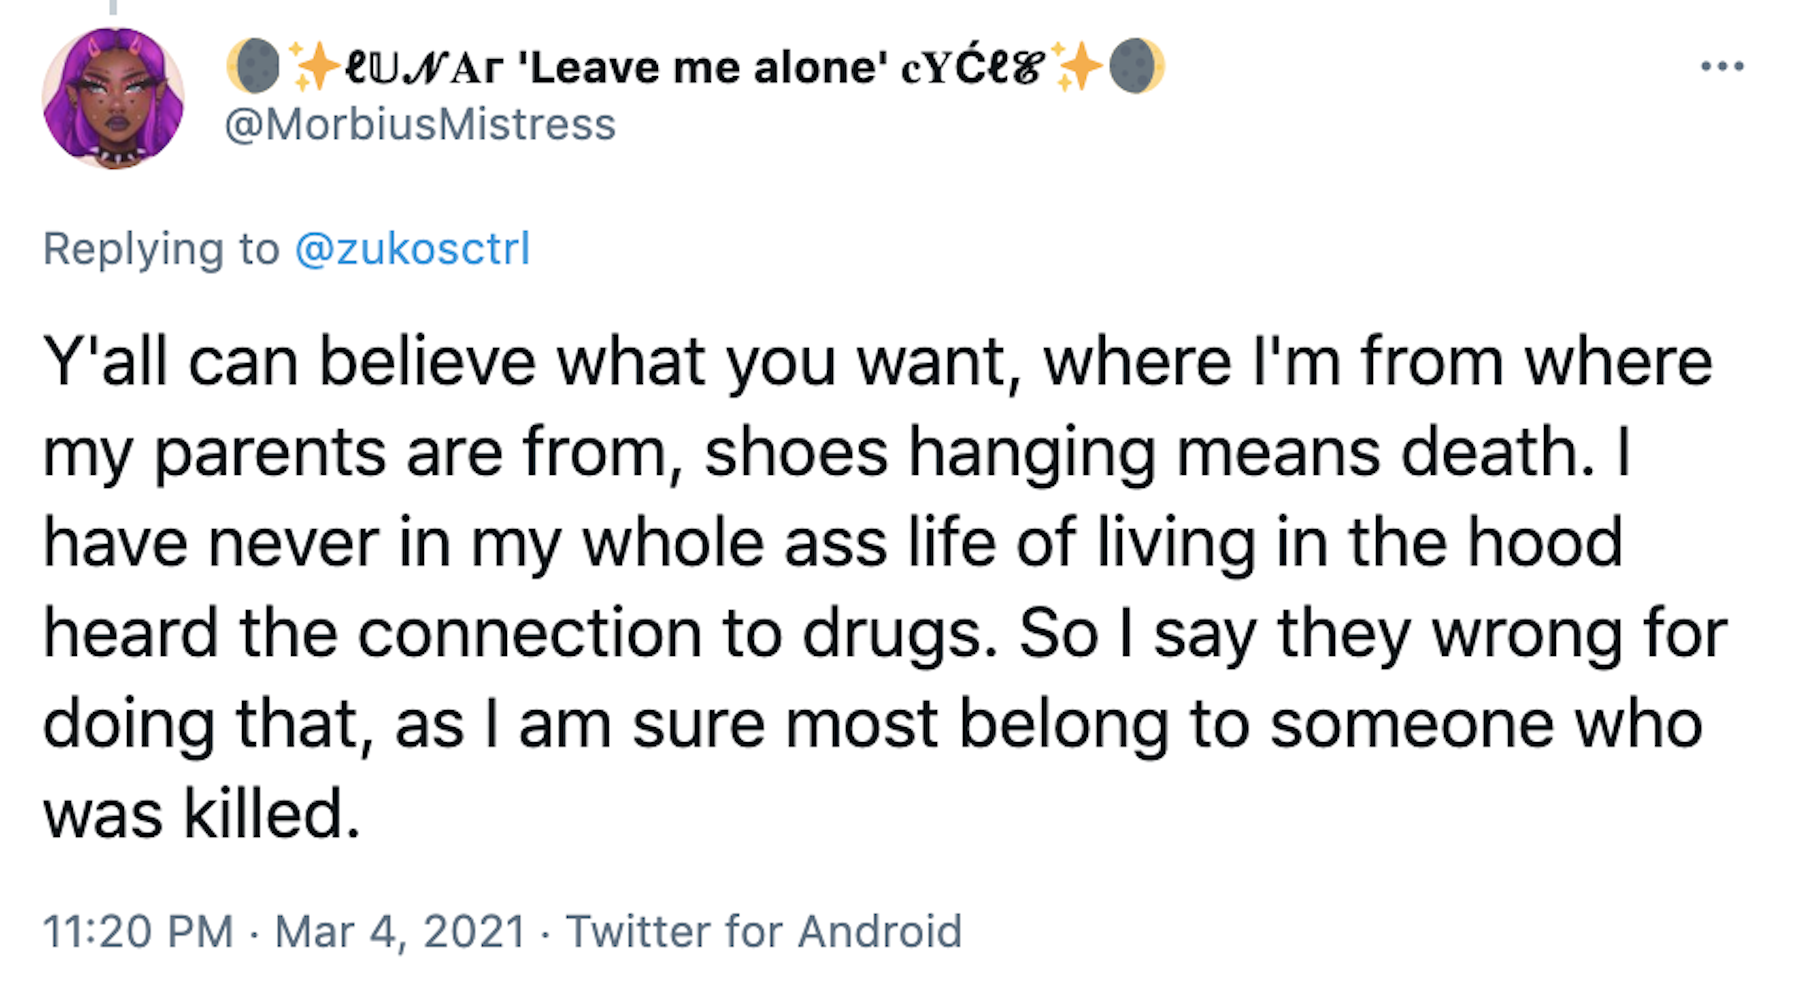 Y'all can believe what you want, where I'm from where my parents are from, shoes hanging means death. I have never in my whole ass life of living in the hood heard the connection to drugs. So I say they wrong for doing that, as I am sure most belong to someone who was killed.